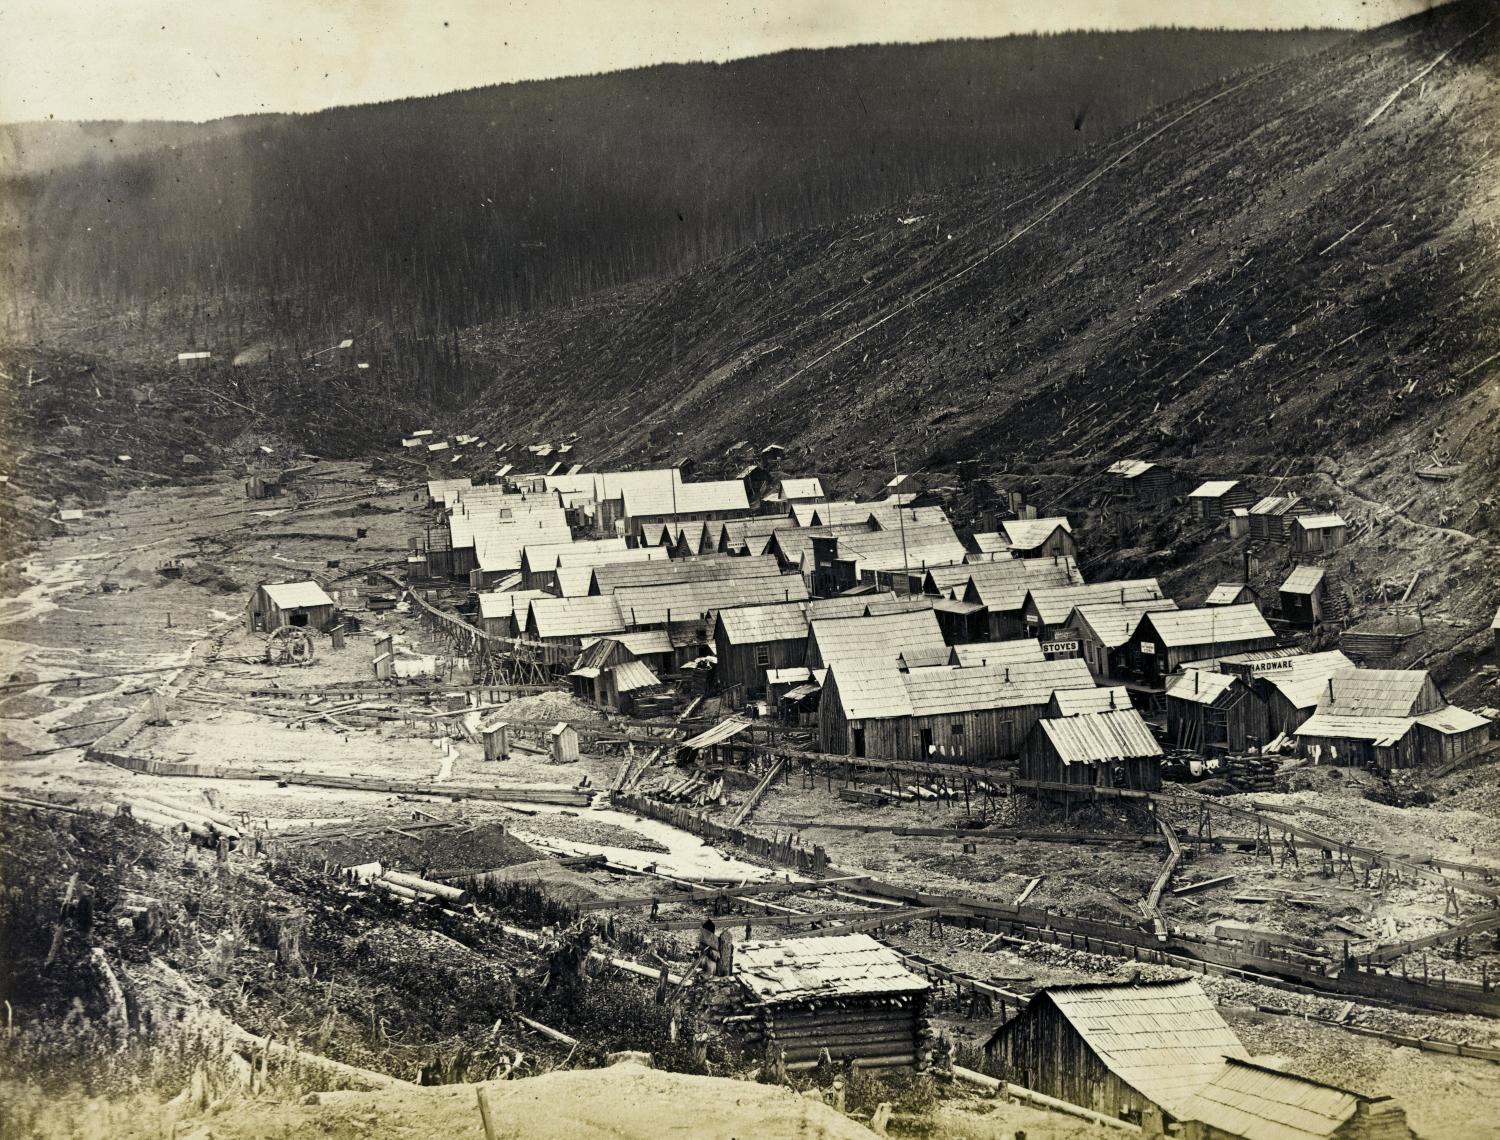 View of Barkerville